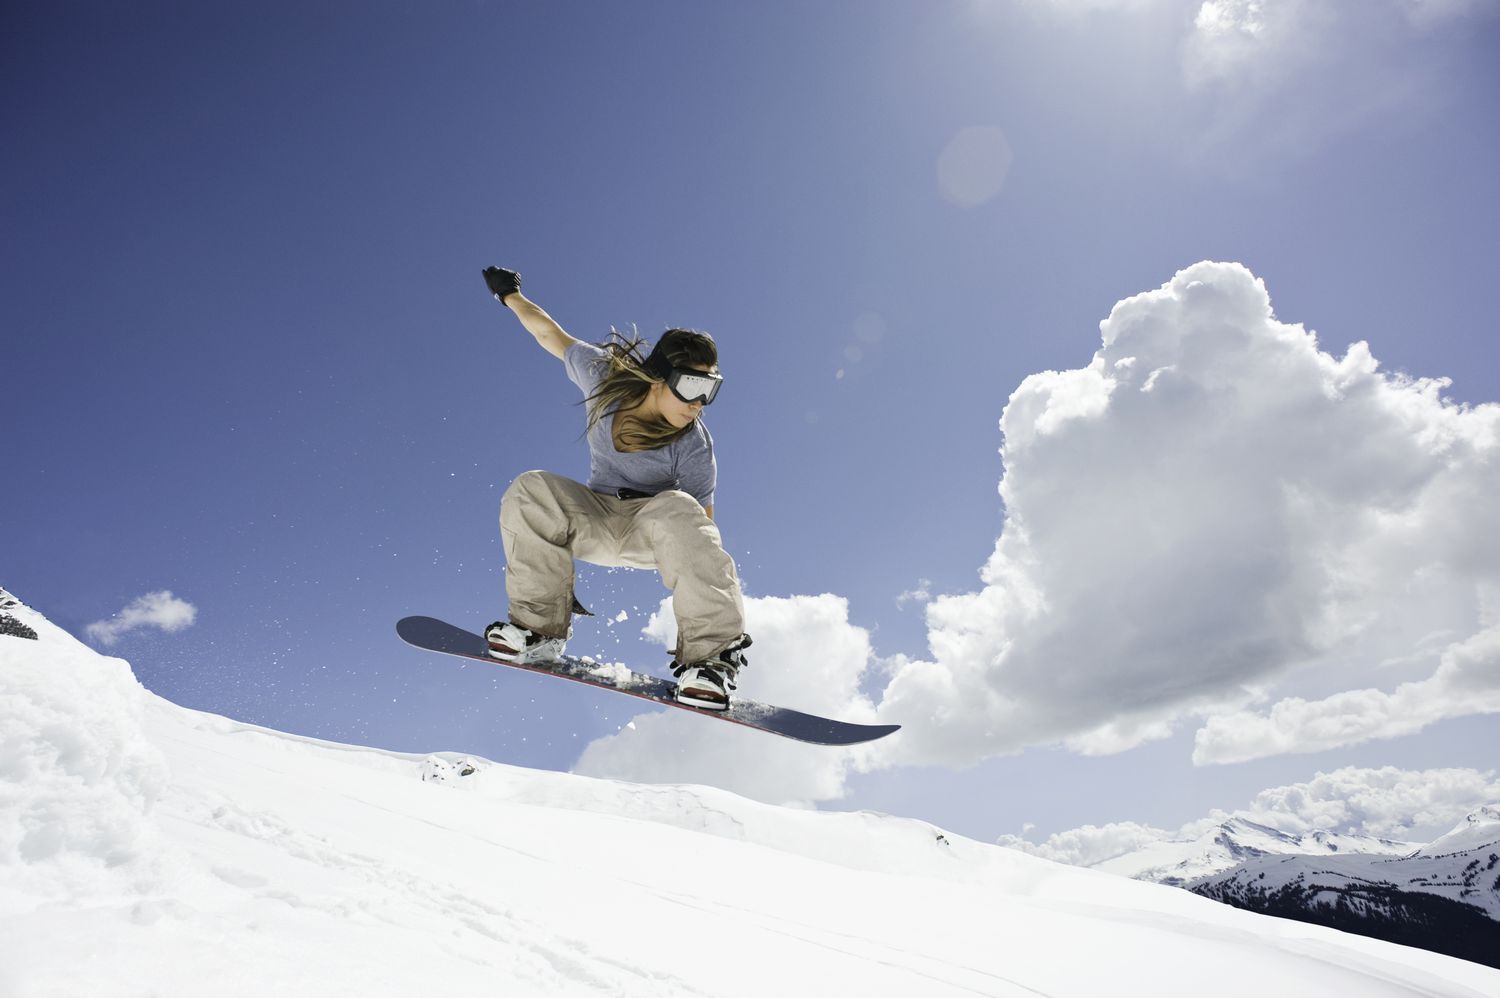 How to Snowboard/ How Long Does it Take to Learn Snowboard